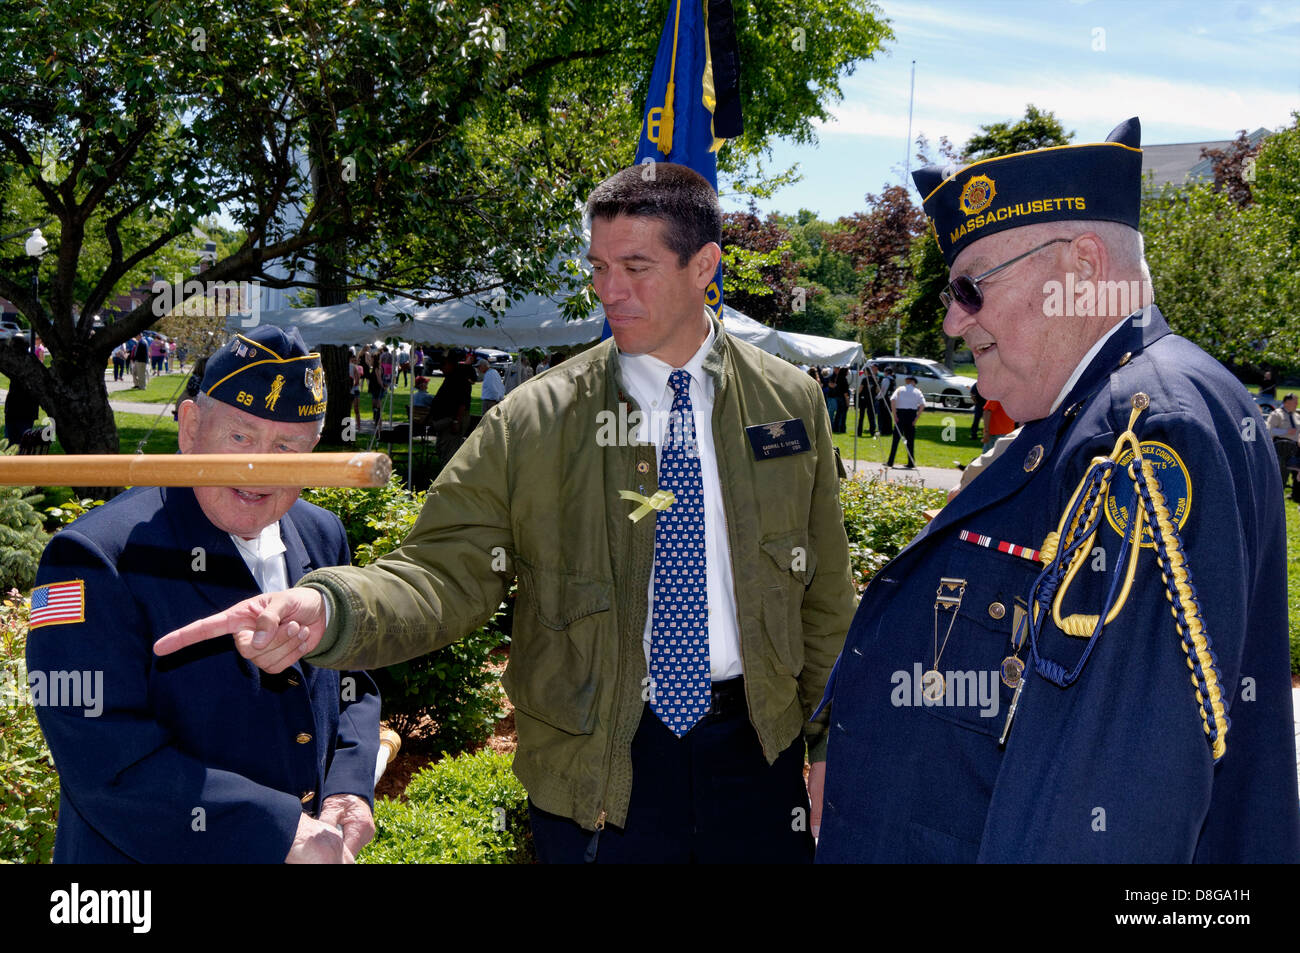 Gabriel Gomez, Massachusetts Republican Senate candidate, shakes hands with supporters at Memorial Day celebration. Stock Photo